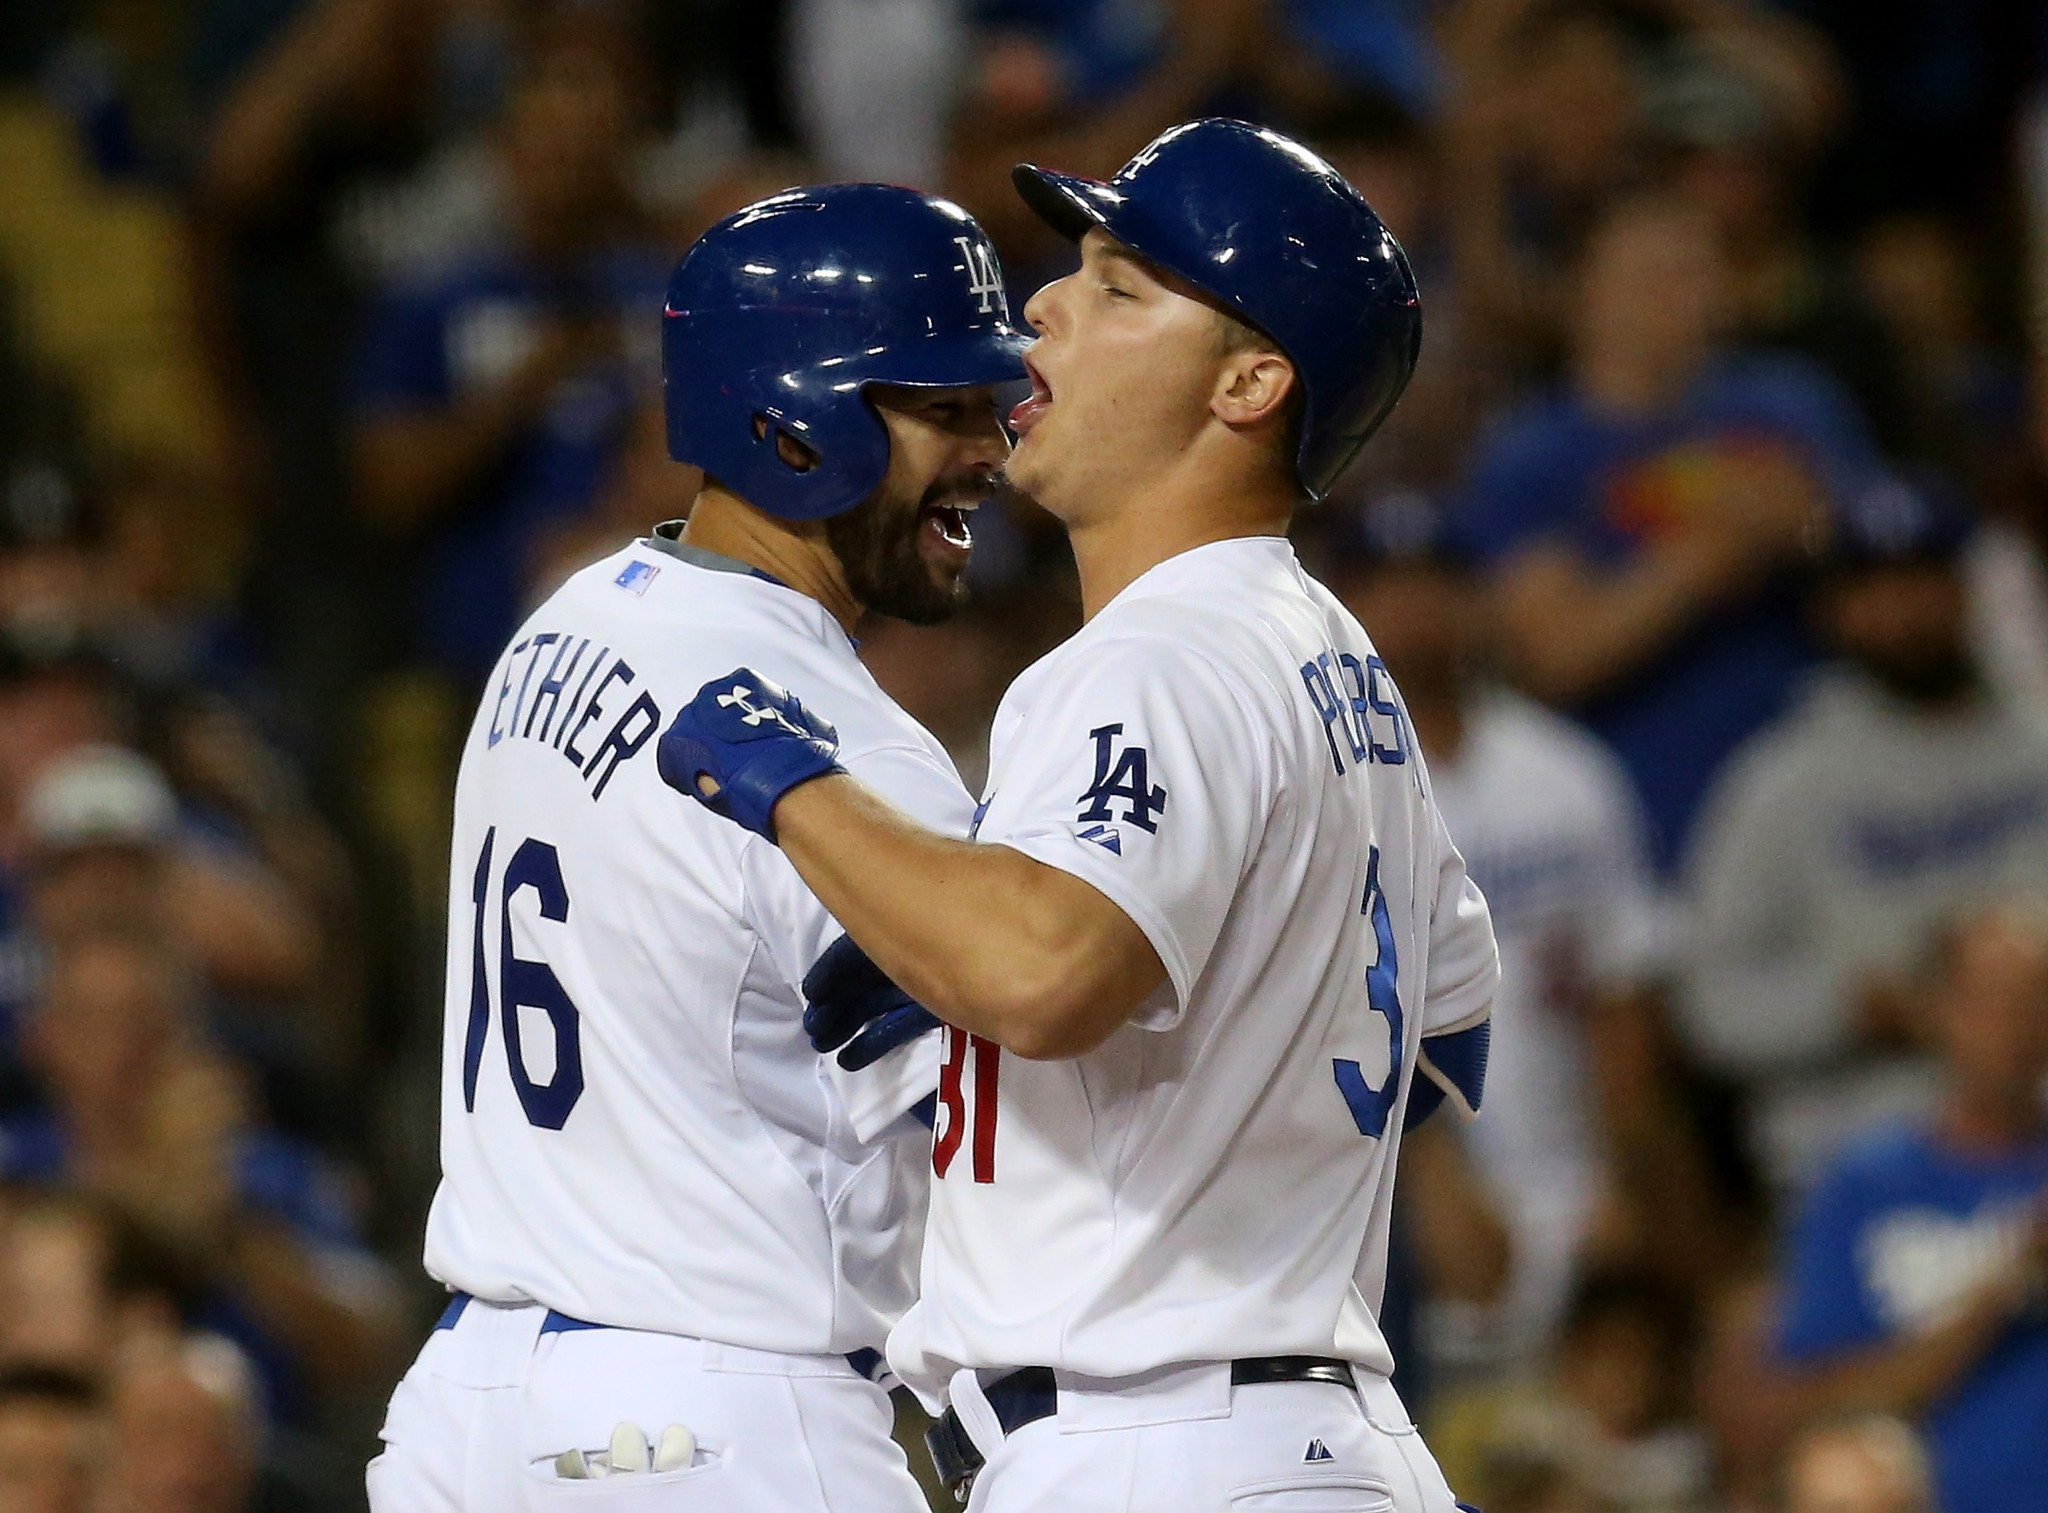 Dodgers' youthful start continues in 8-0 rout of Diamondbacks - LA Times2048 x 1513